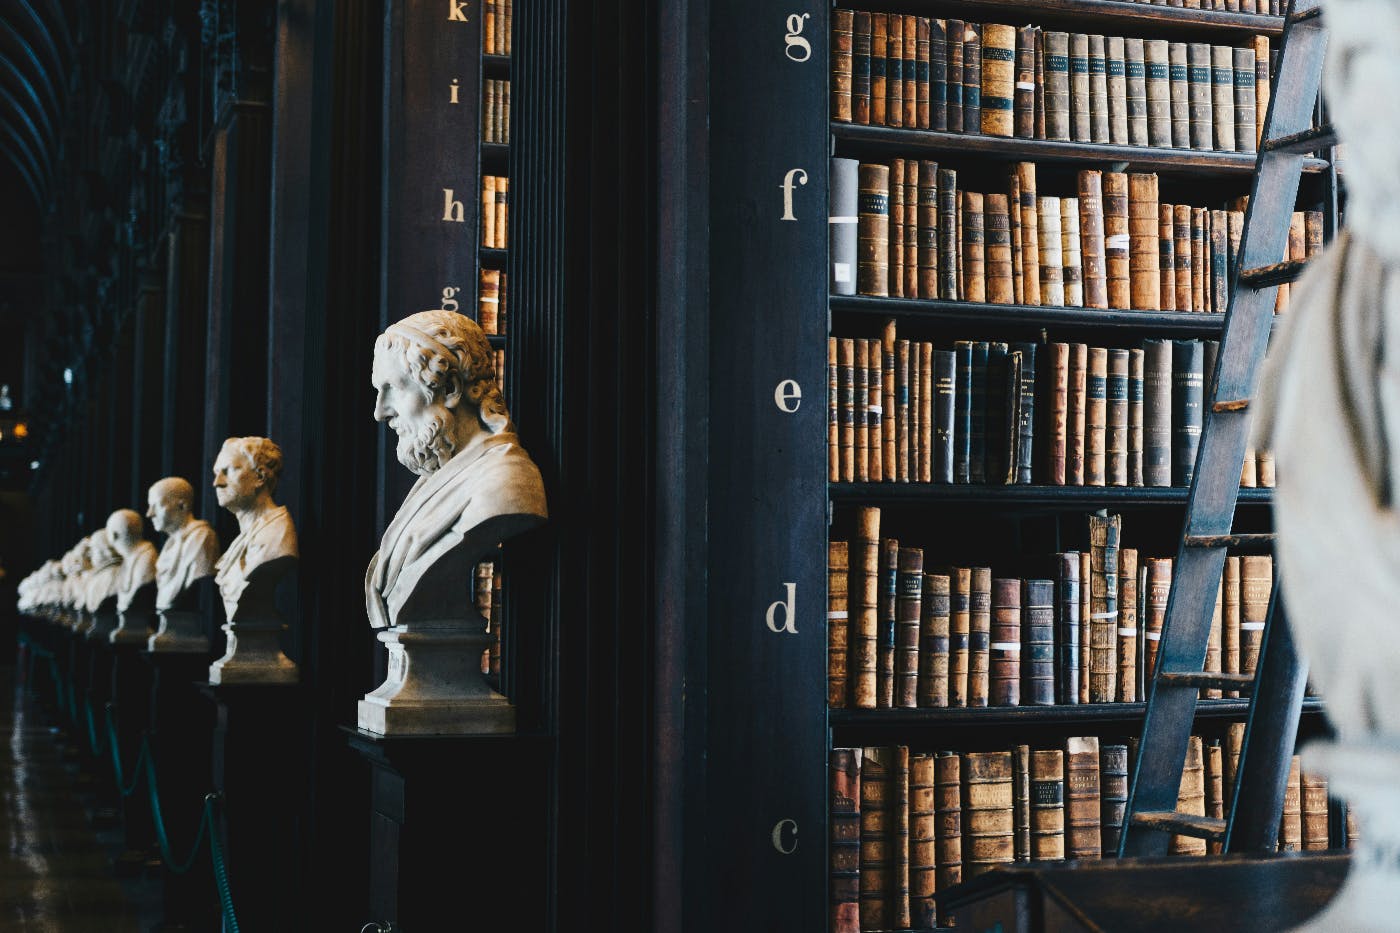 Library shelves with busts of great thinkers at each shelf